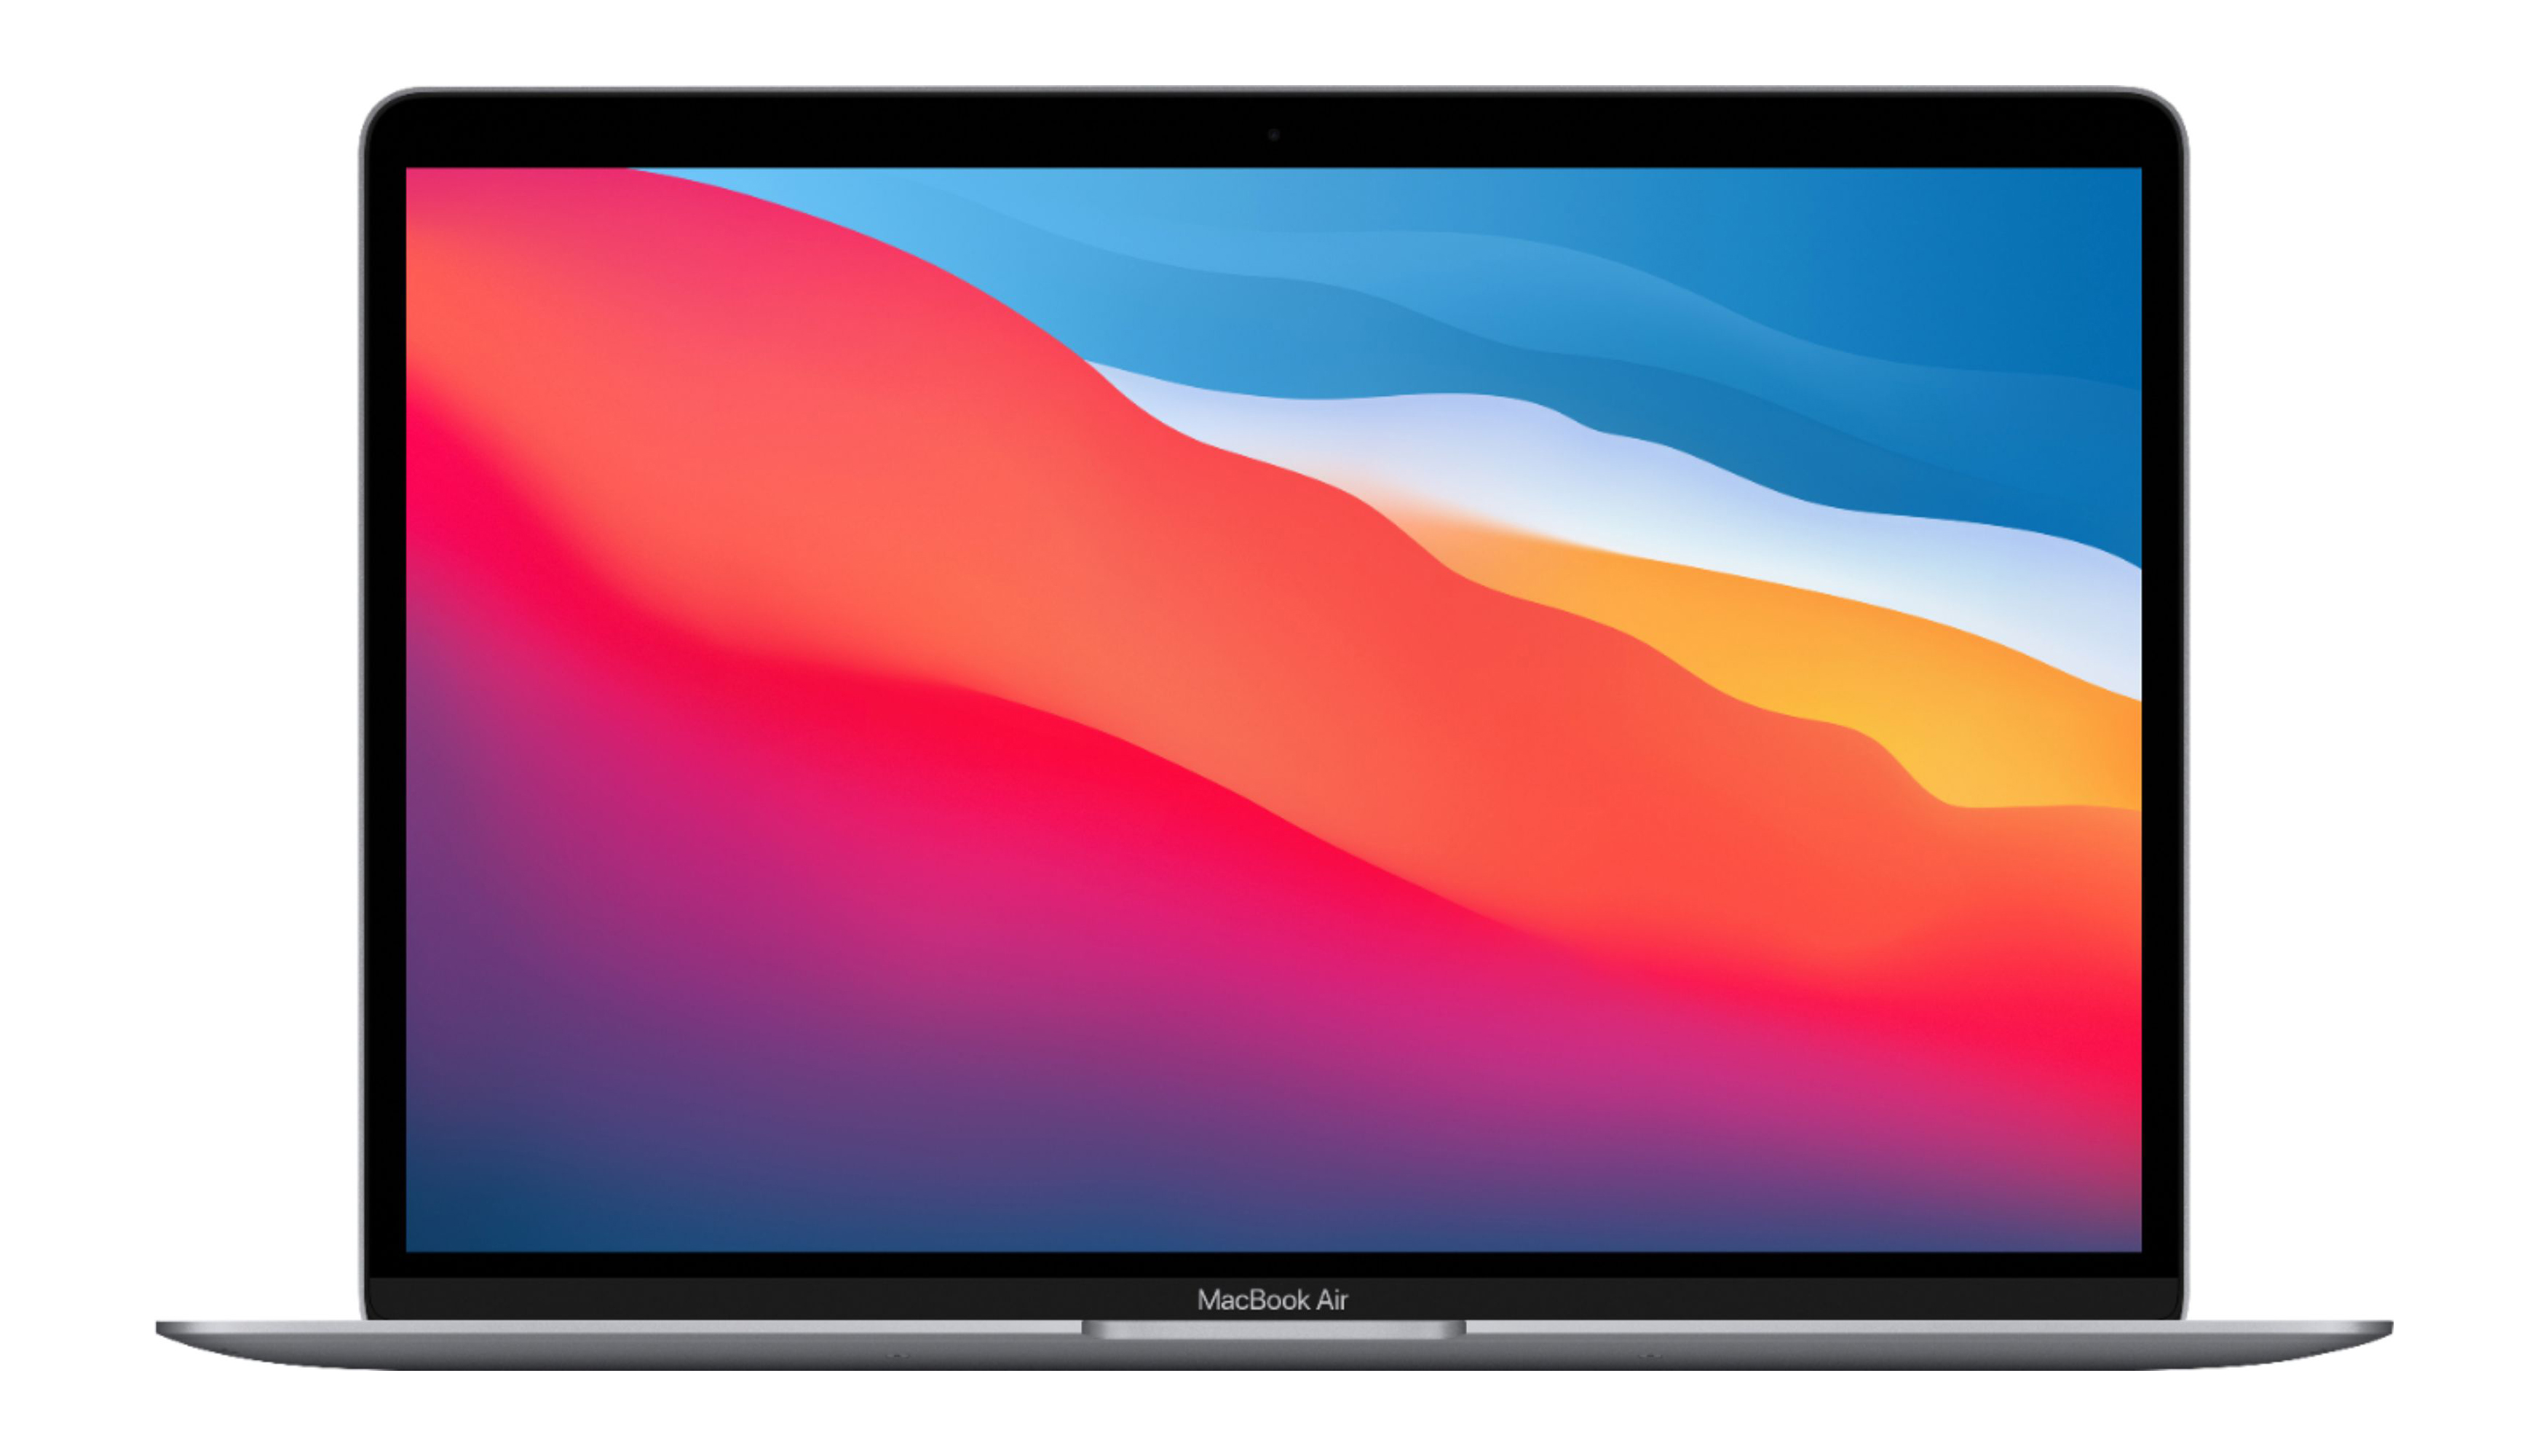 best thin and light laptop MacBook Air (M1, 2020) against a white background